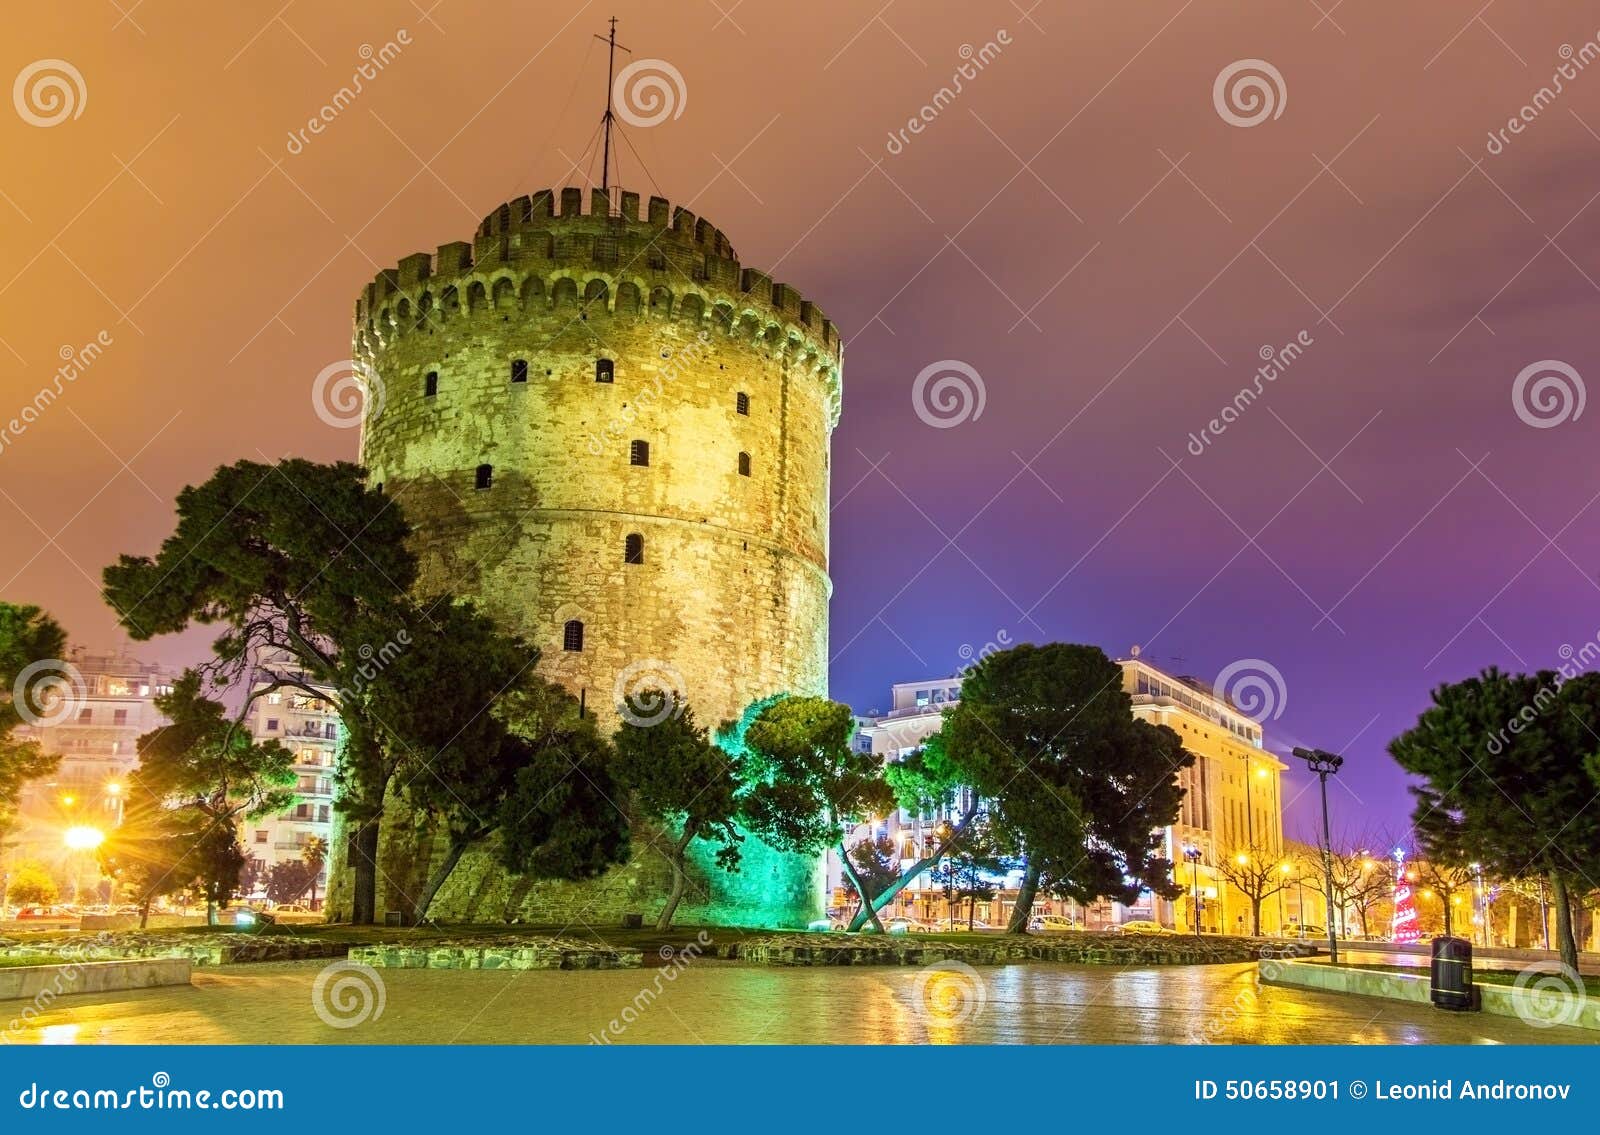 white tower of thessaloniki in greece